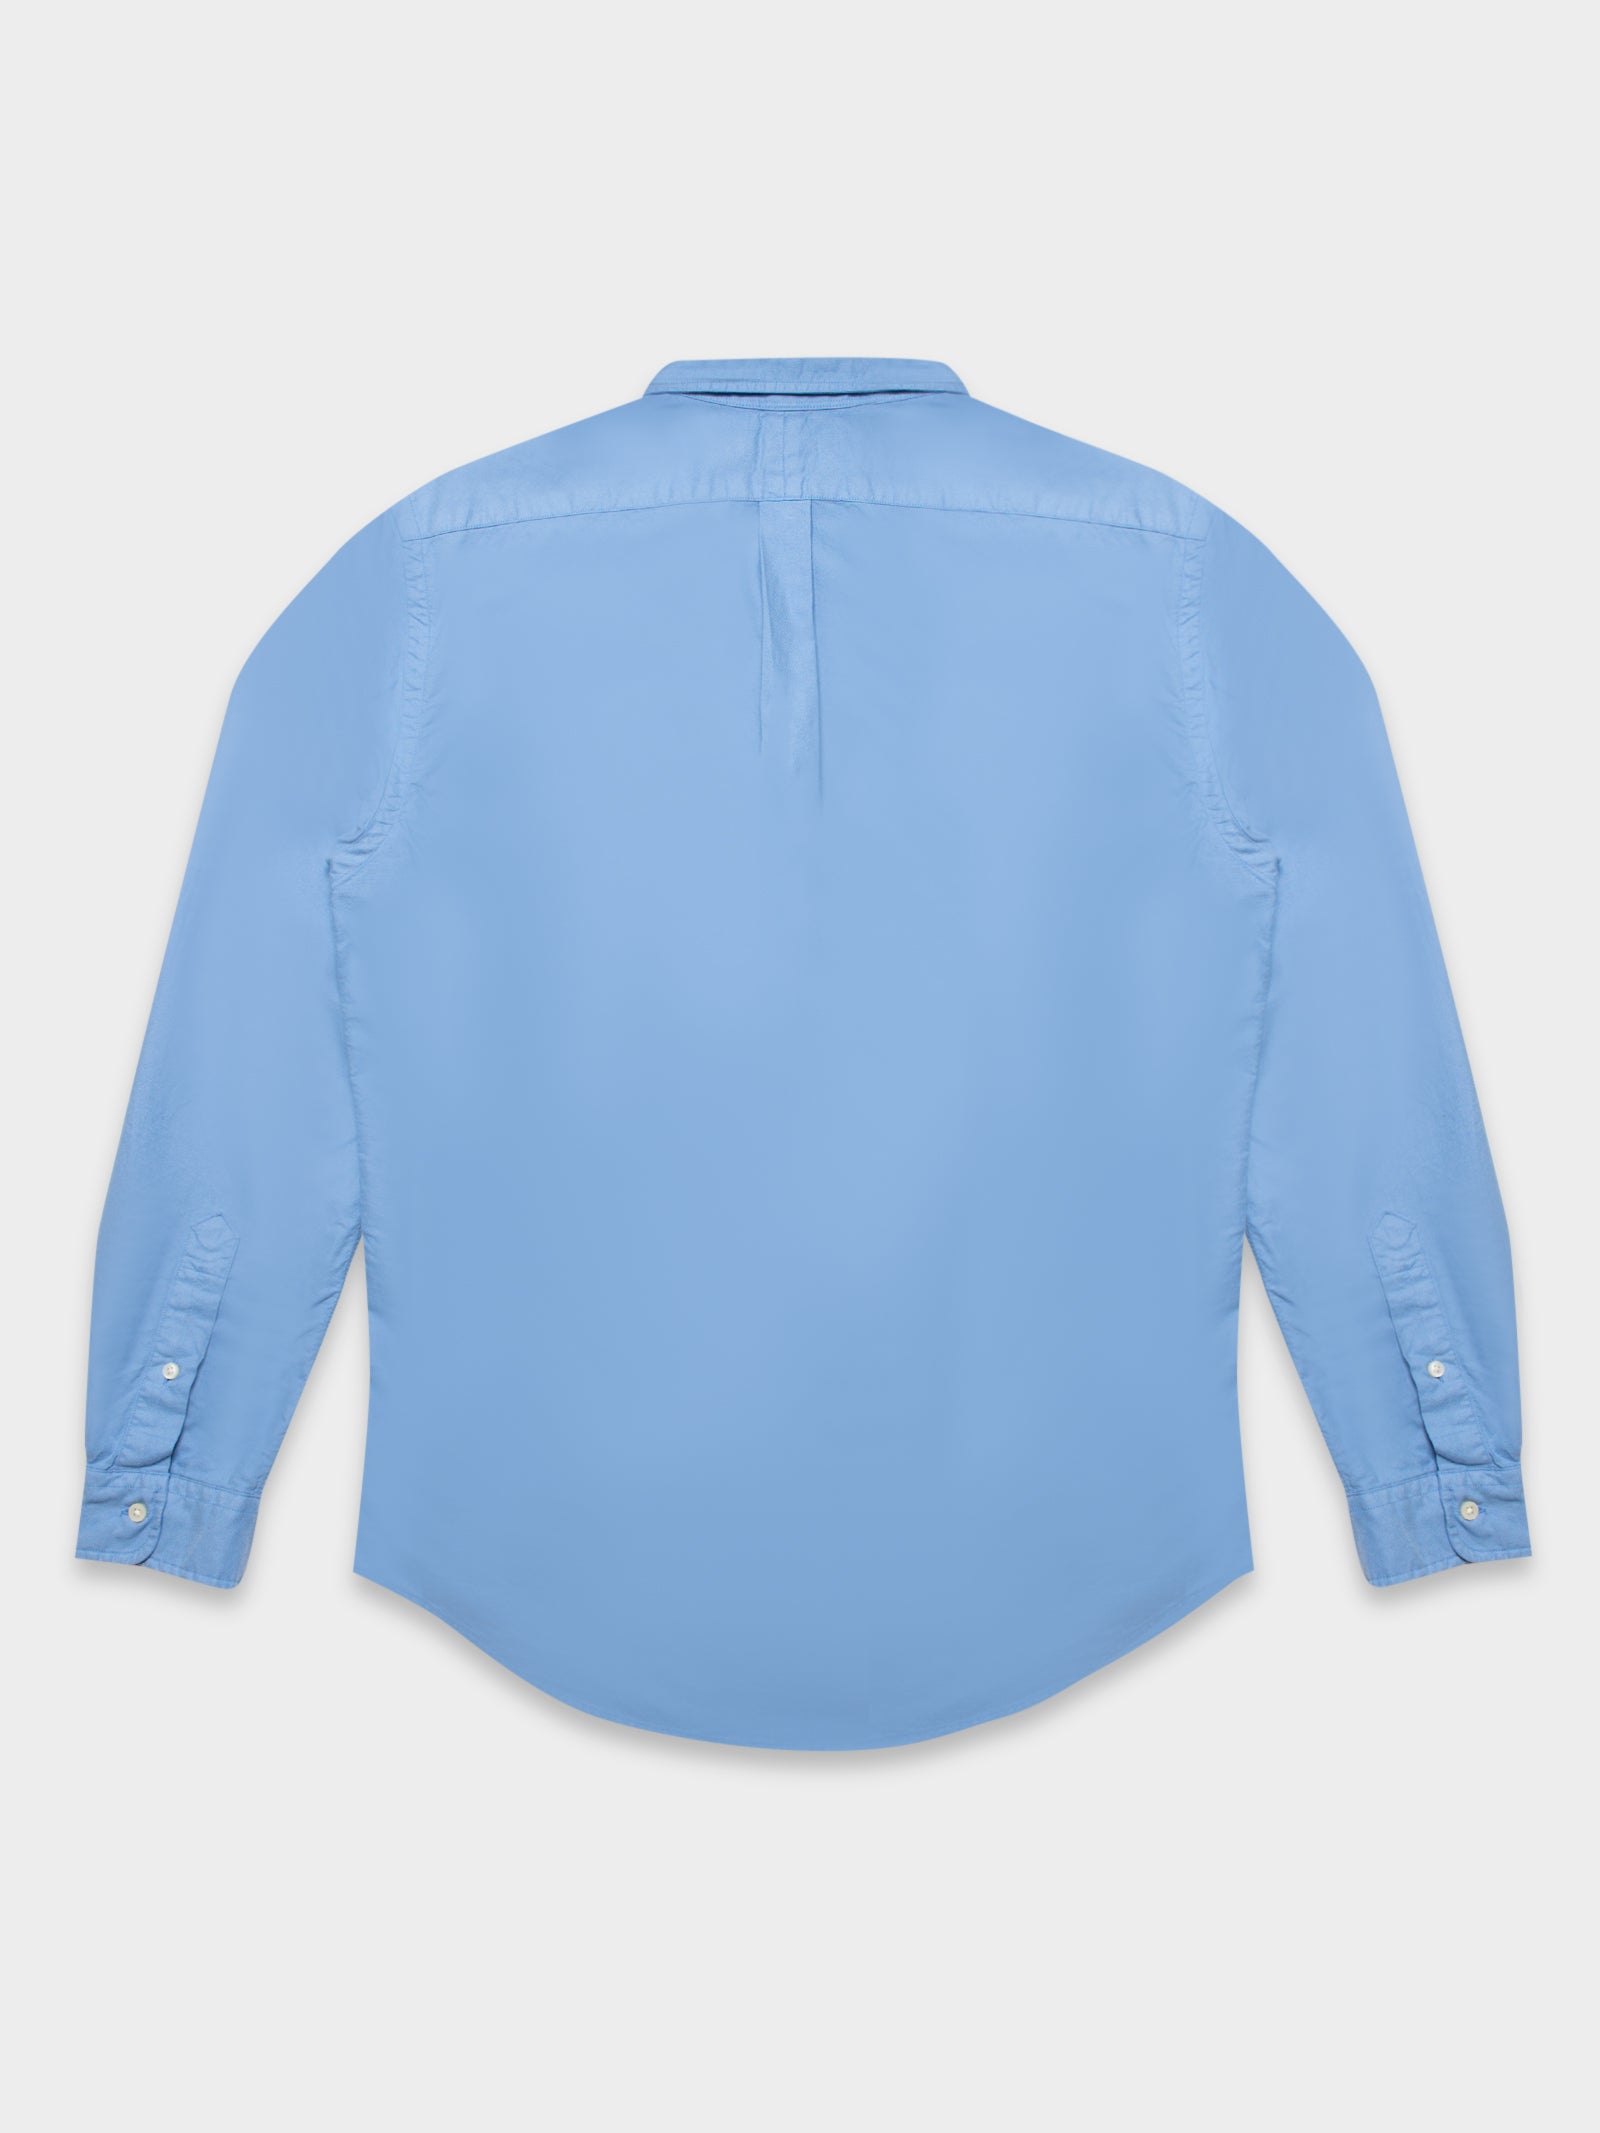 Long Sleeve Button Up Shirt in Blue & White - Glue Store